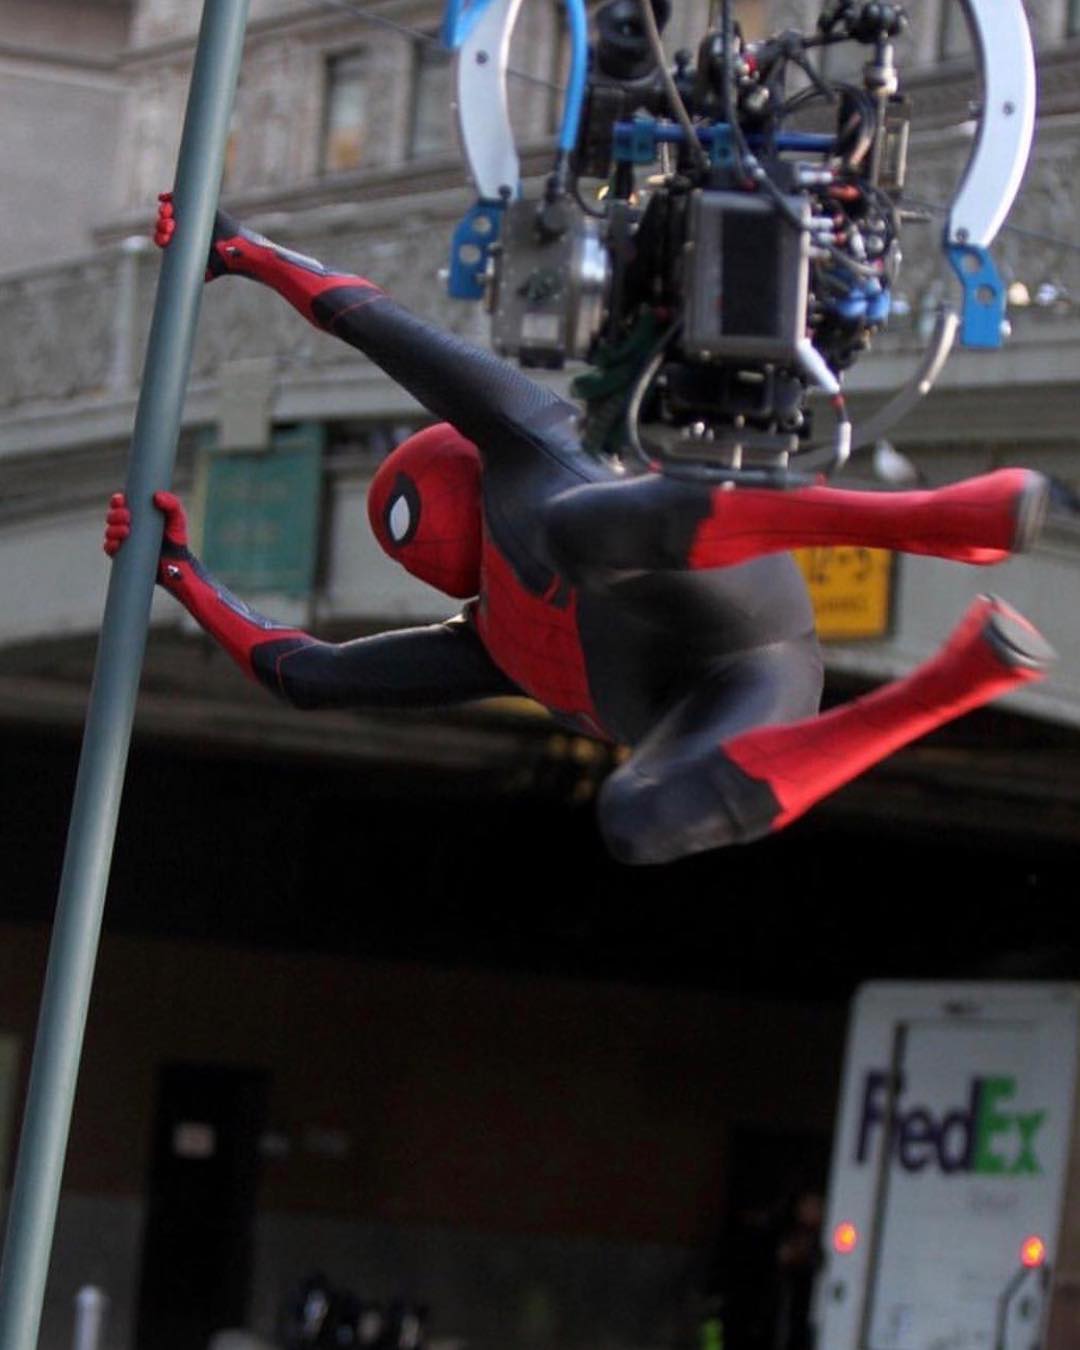 The actor, who has time and again given major bloopers to Marvel fans, often shares pictures from the sets, showcasing him performing stunts.